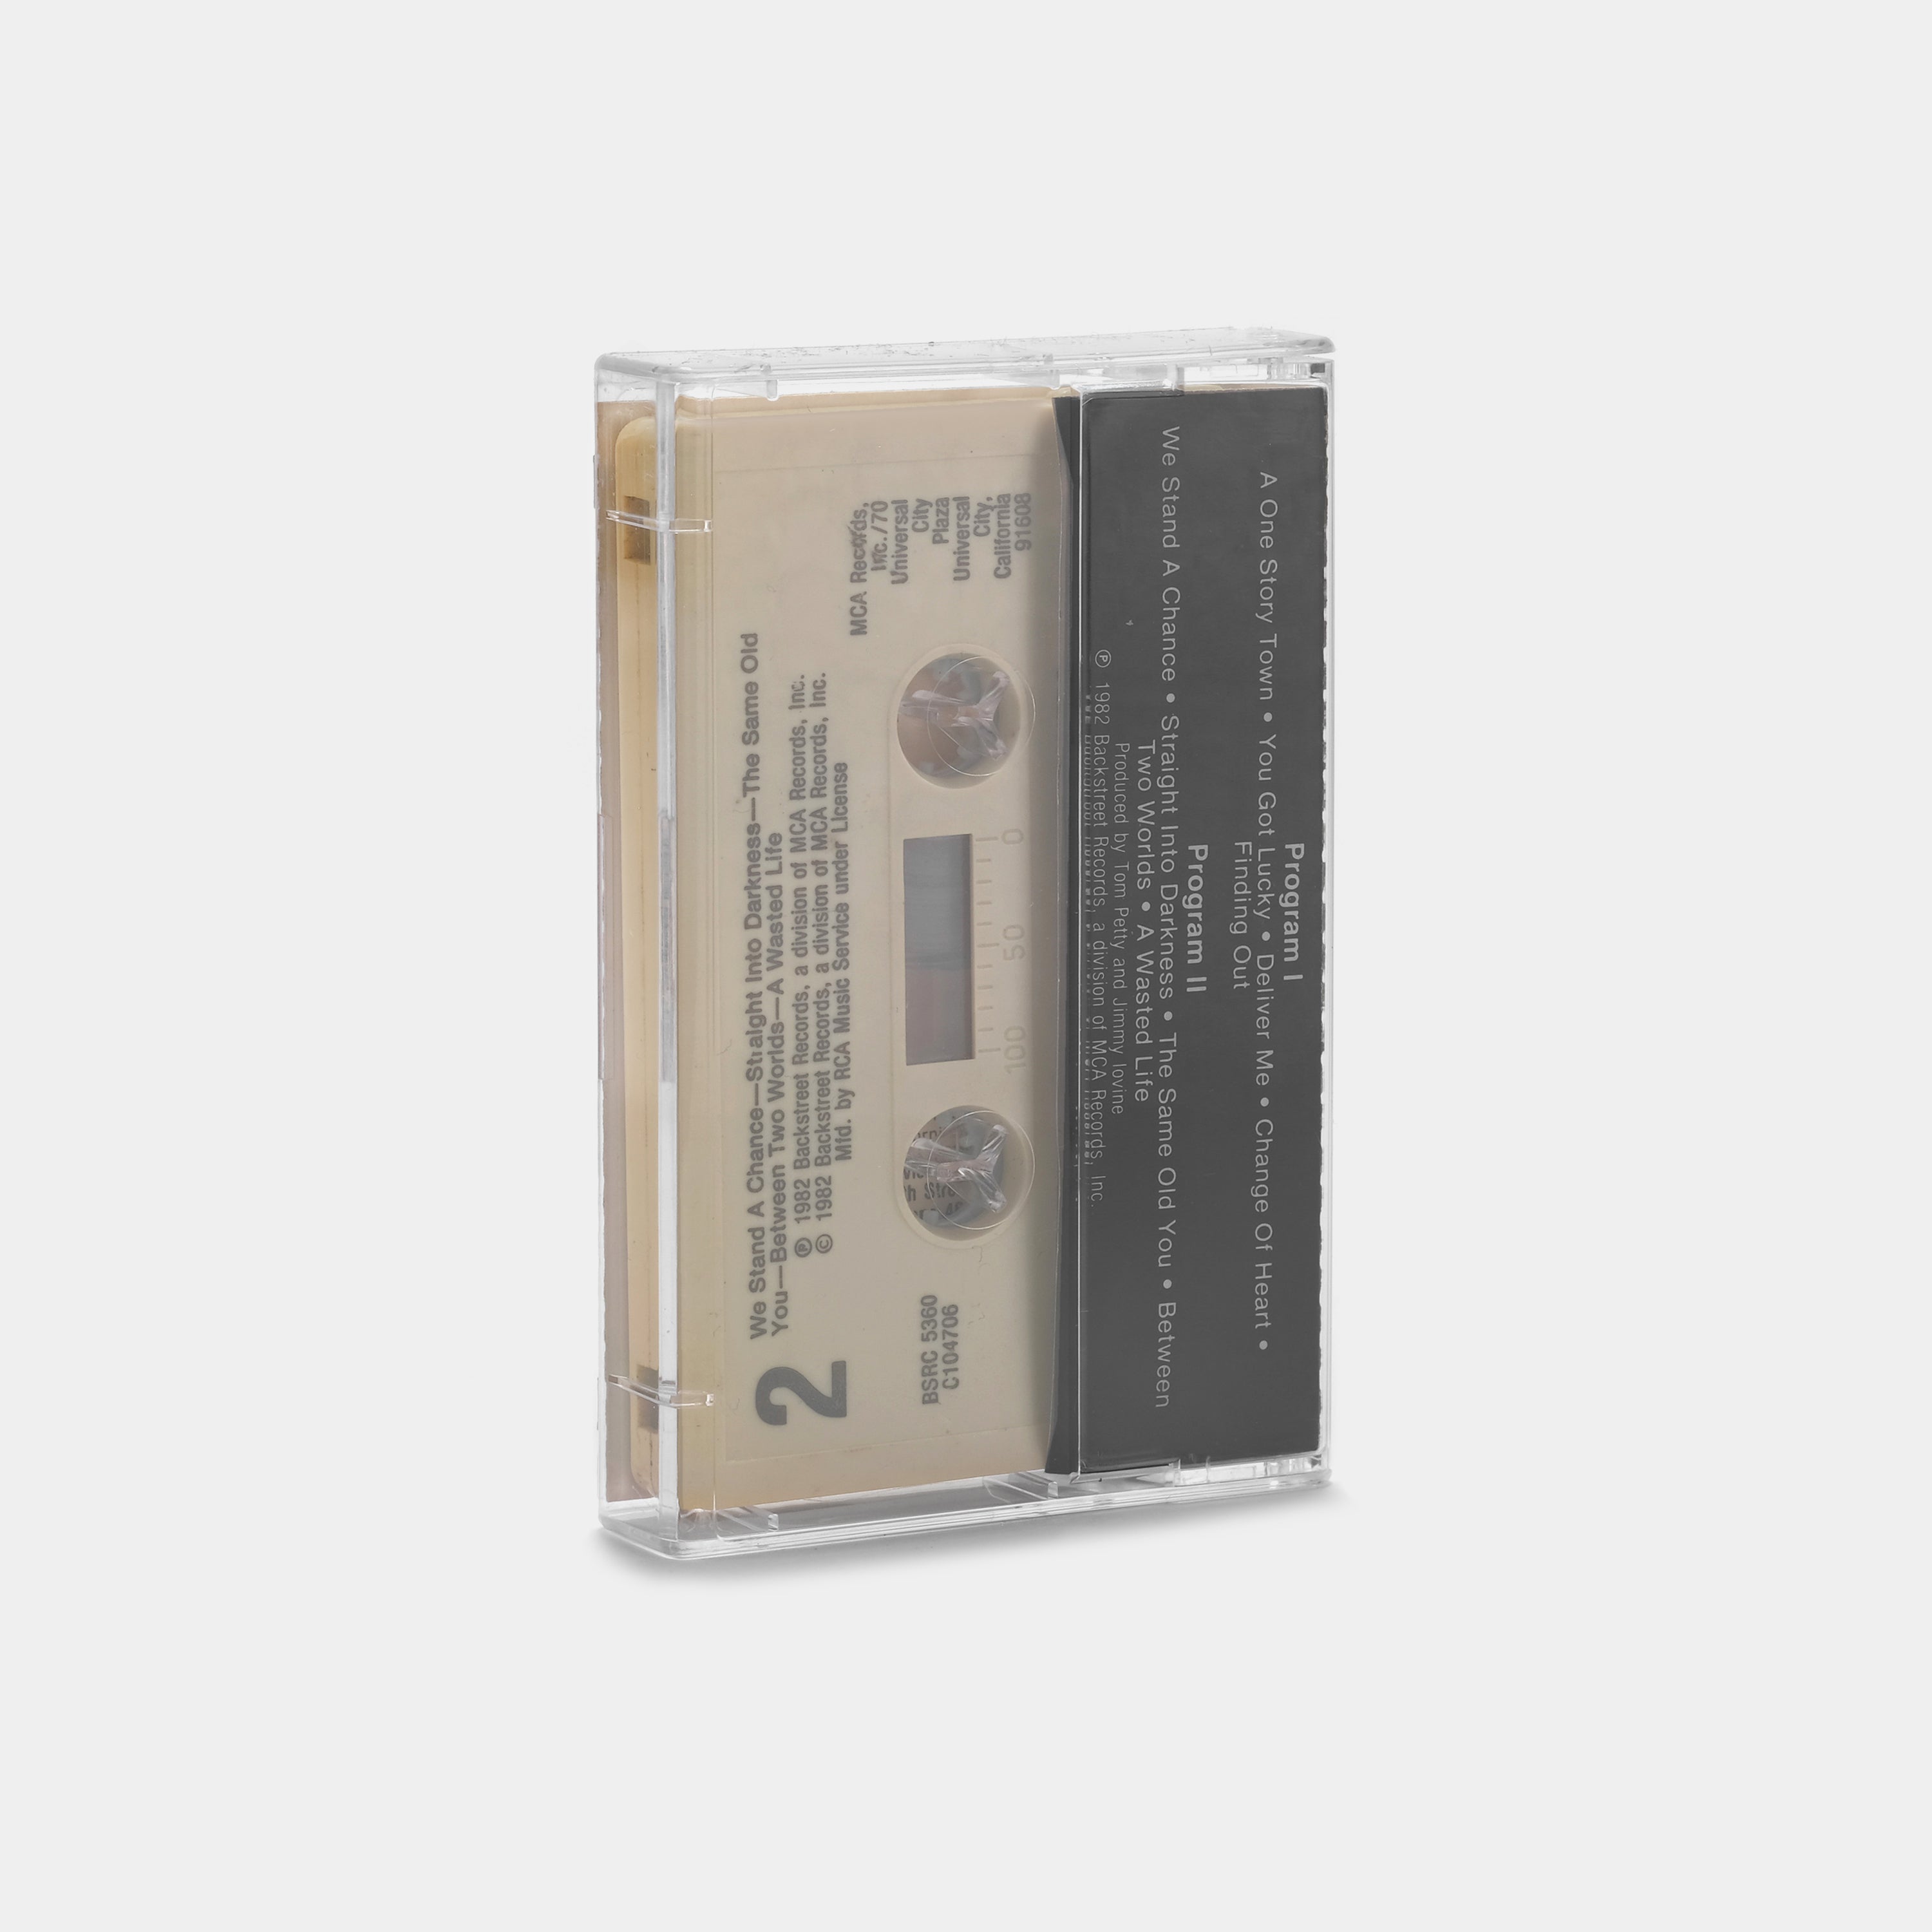 Tom Petty and the Heartbreakers - Long After Dark Cassette Tape